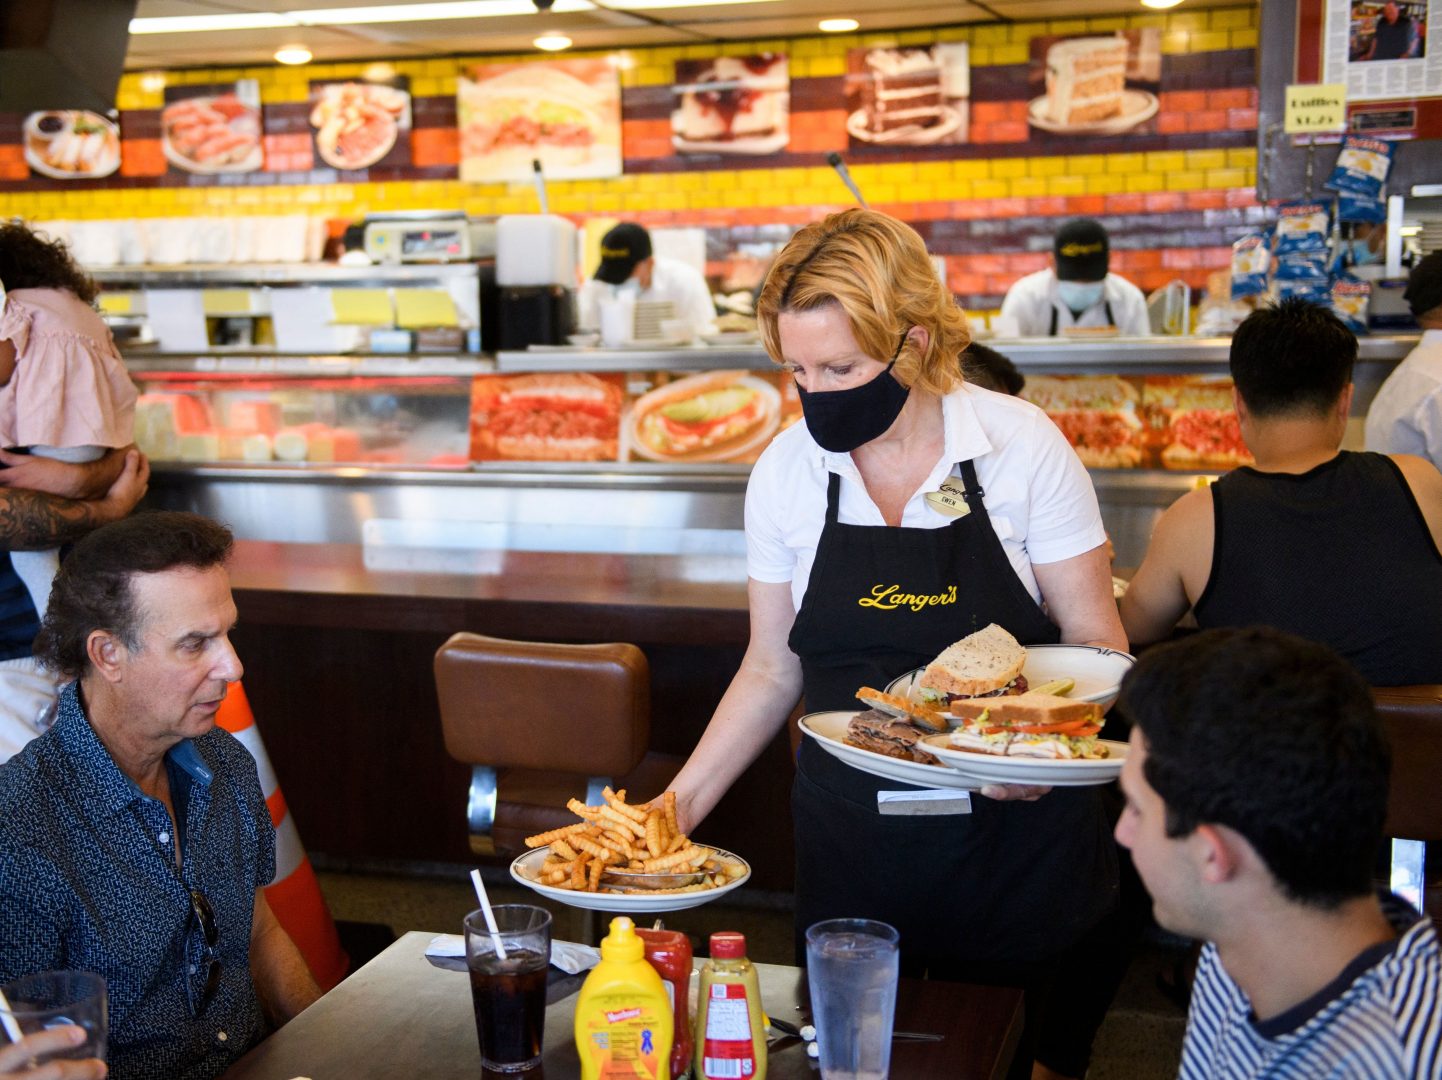 A server delivers food to customers dining at a restaurant in Los Angeles on Aug. 7. Restaurants are boosting pay to attract workers, and that could have an impact on already-high inflation.